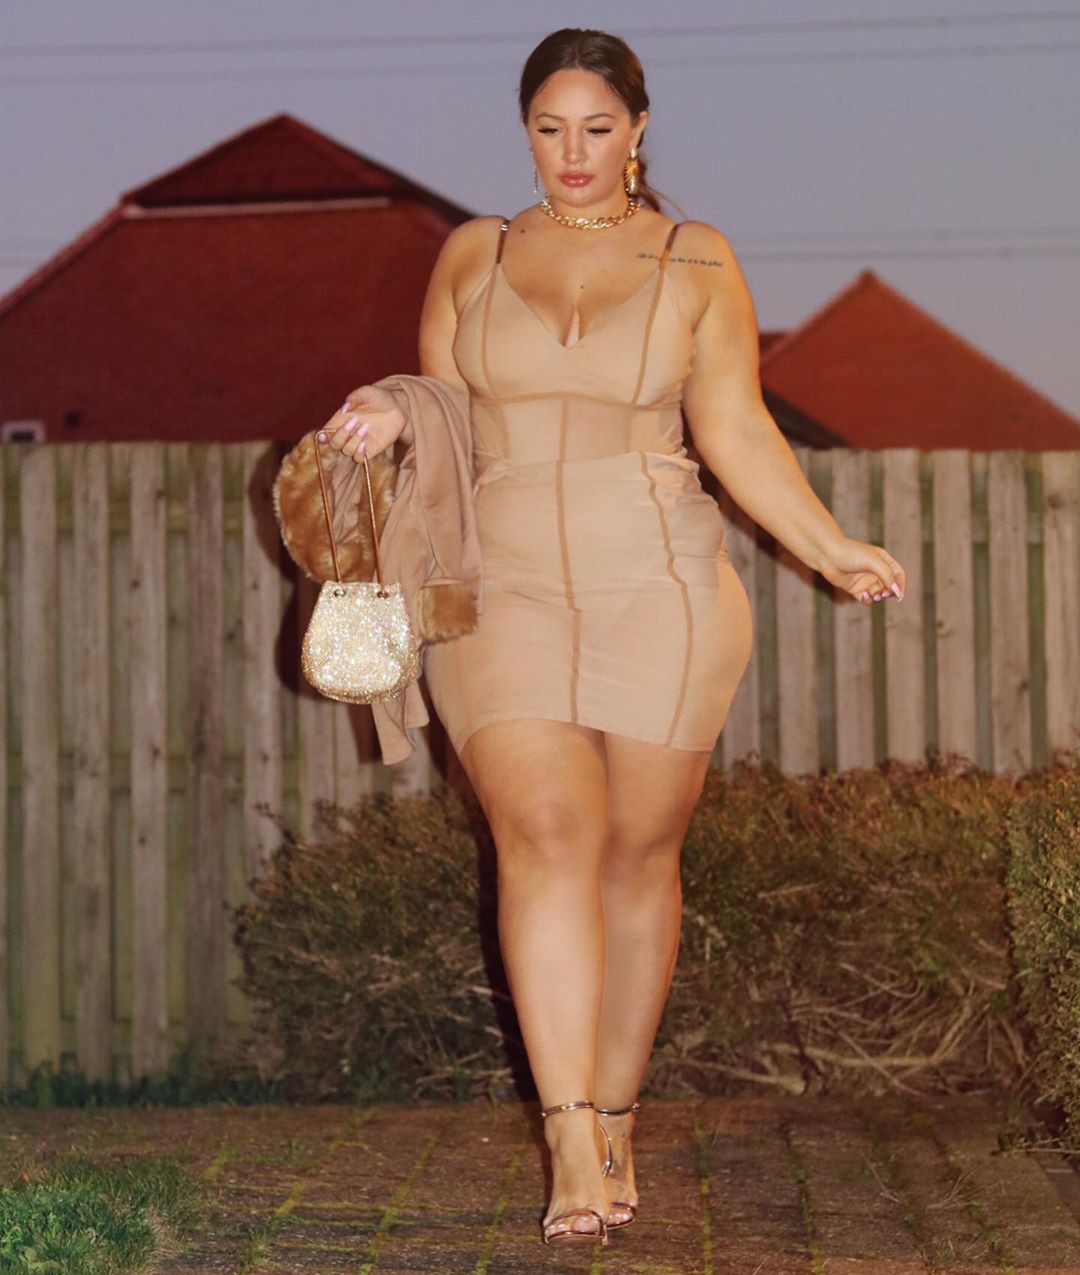 Brown Dresses Ideas With Dress Woman Thighs Hot Legs Plus Size